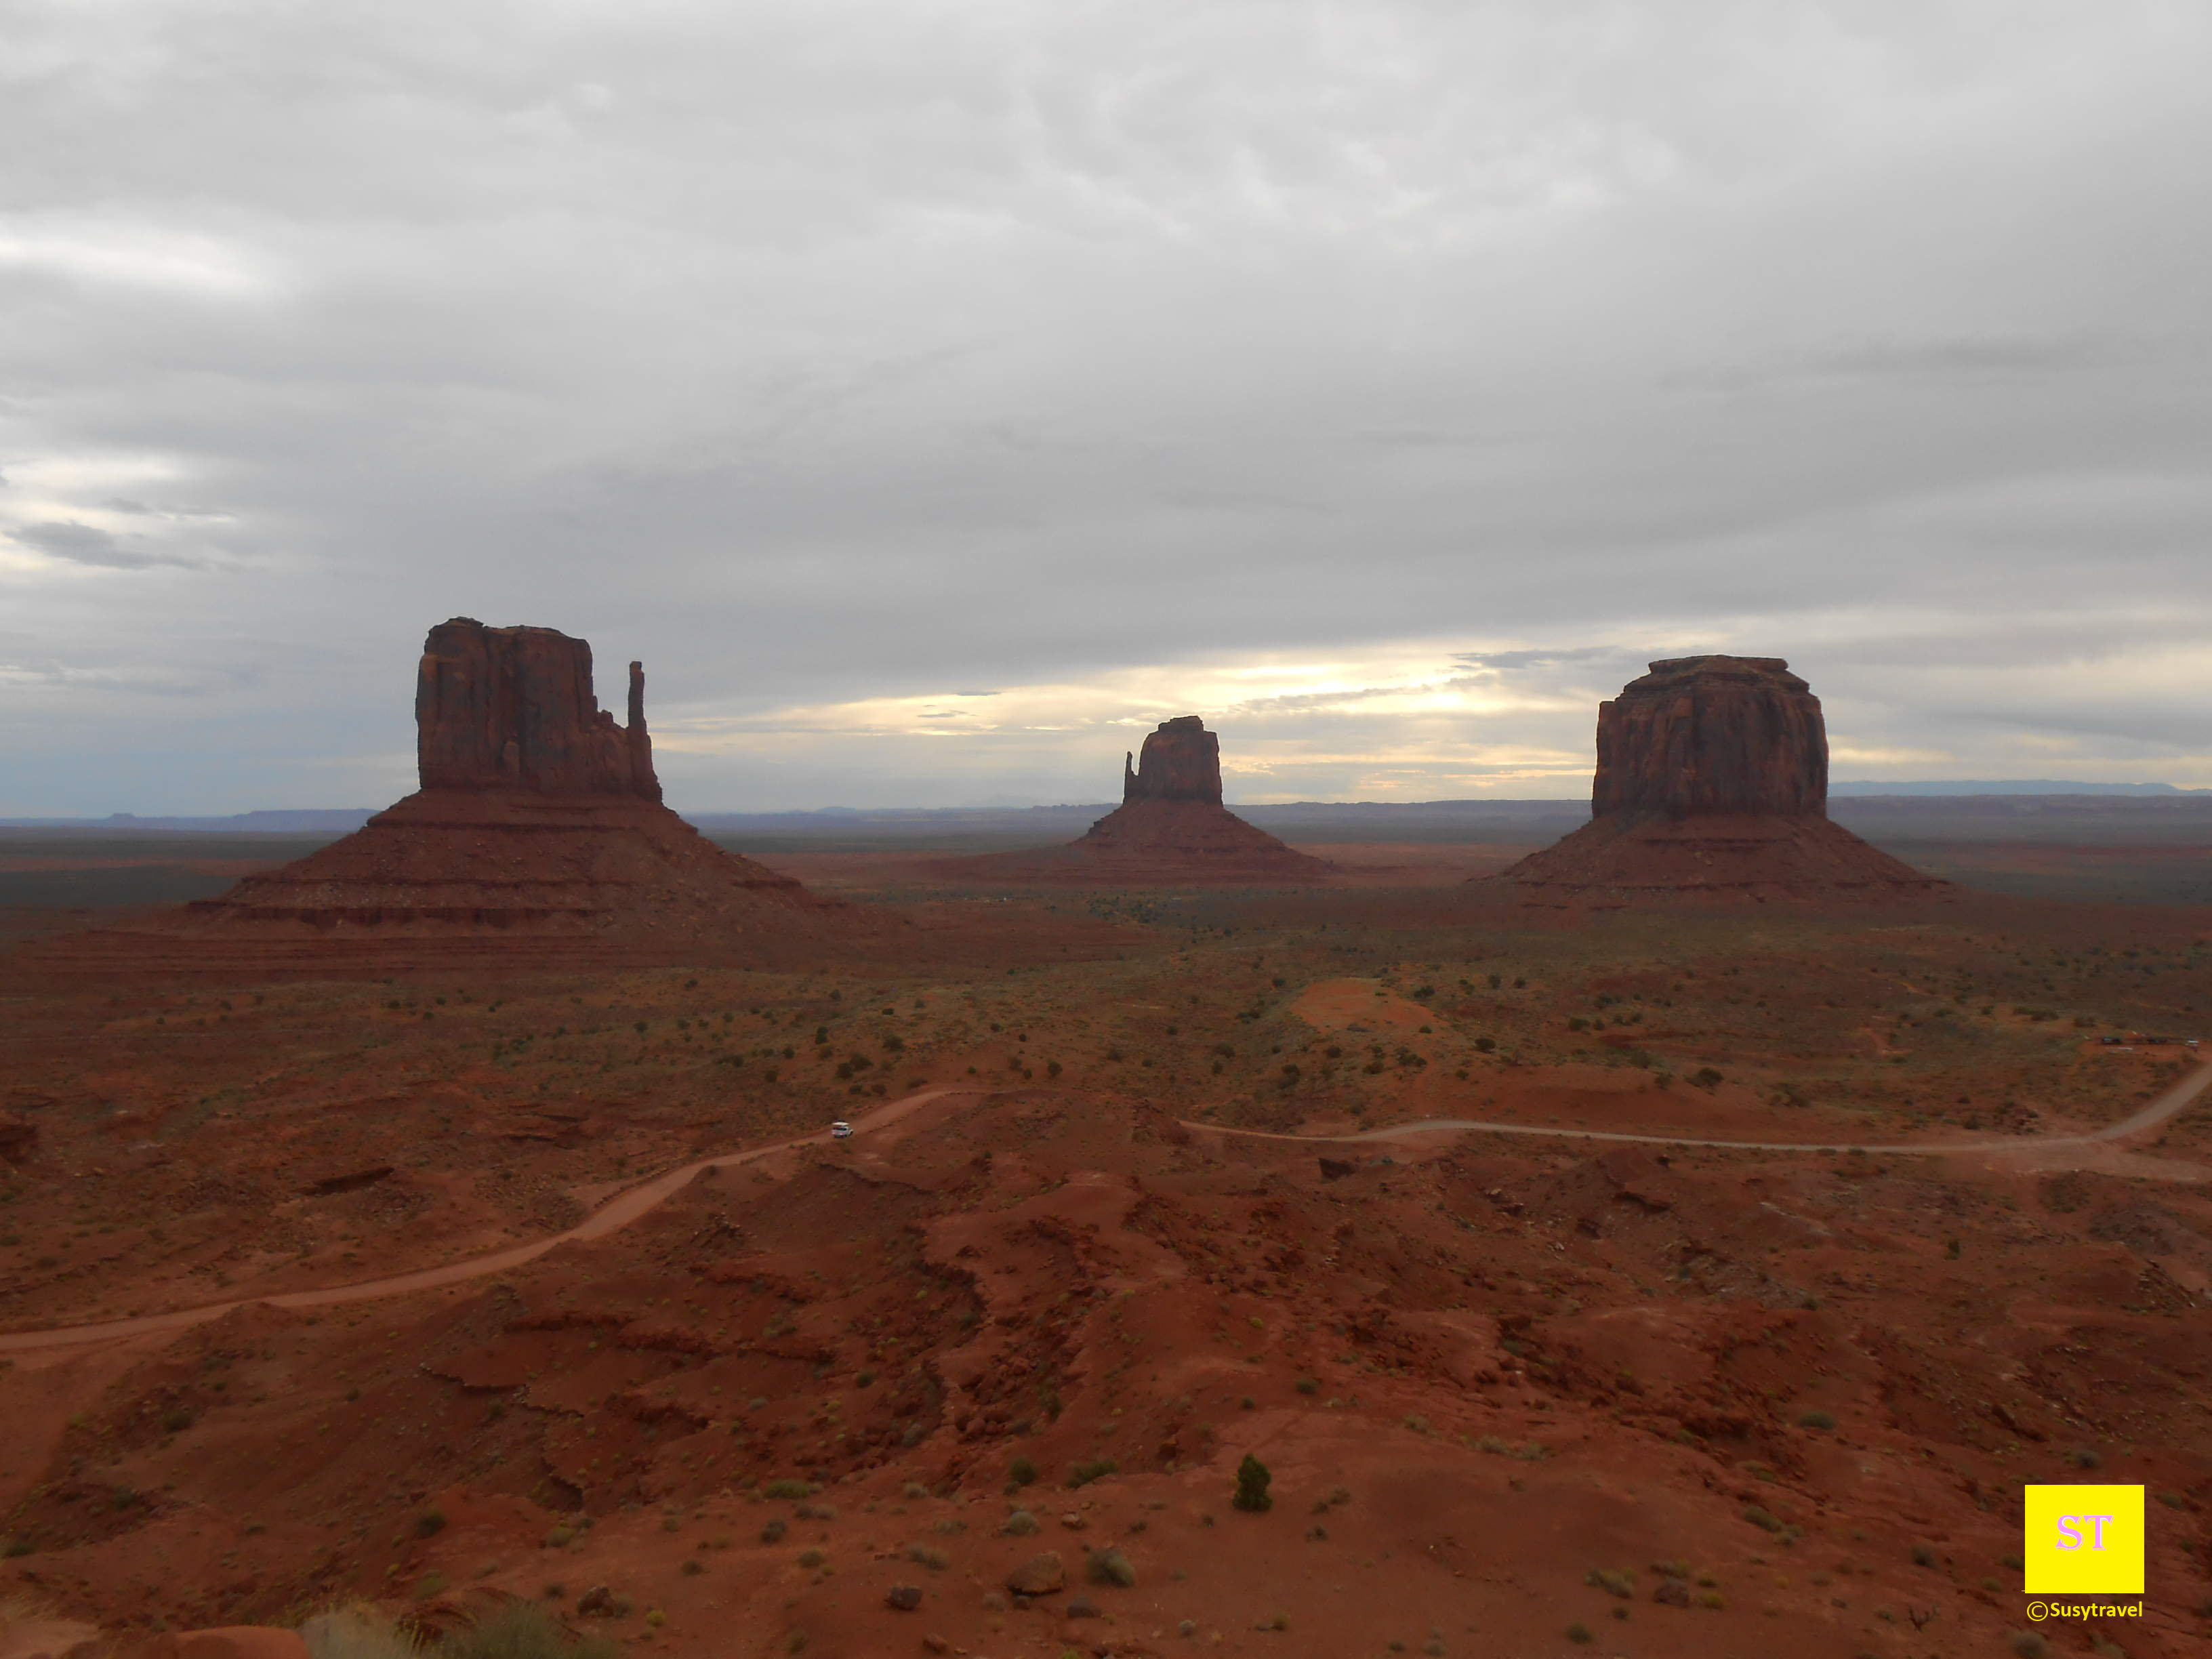 Mittens and Merrick's Butte, monument valley